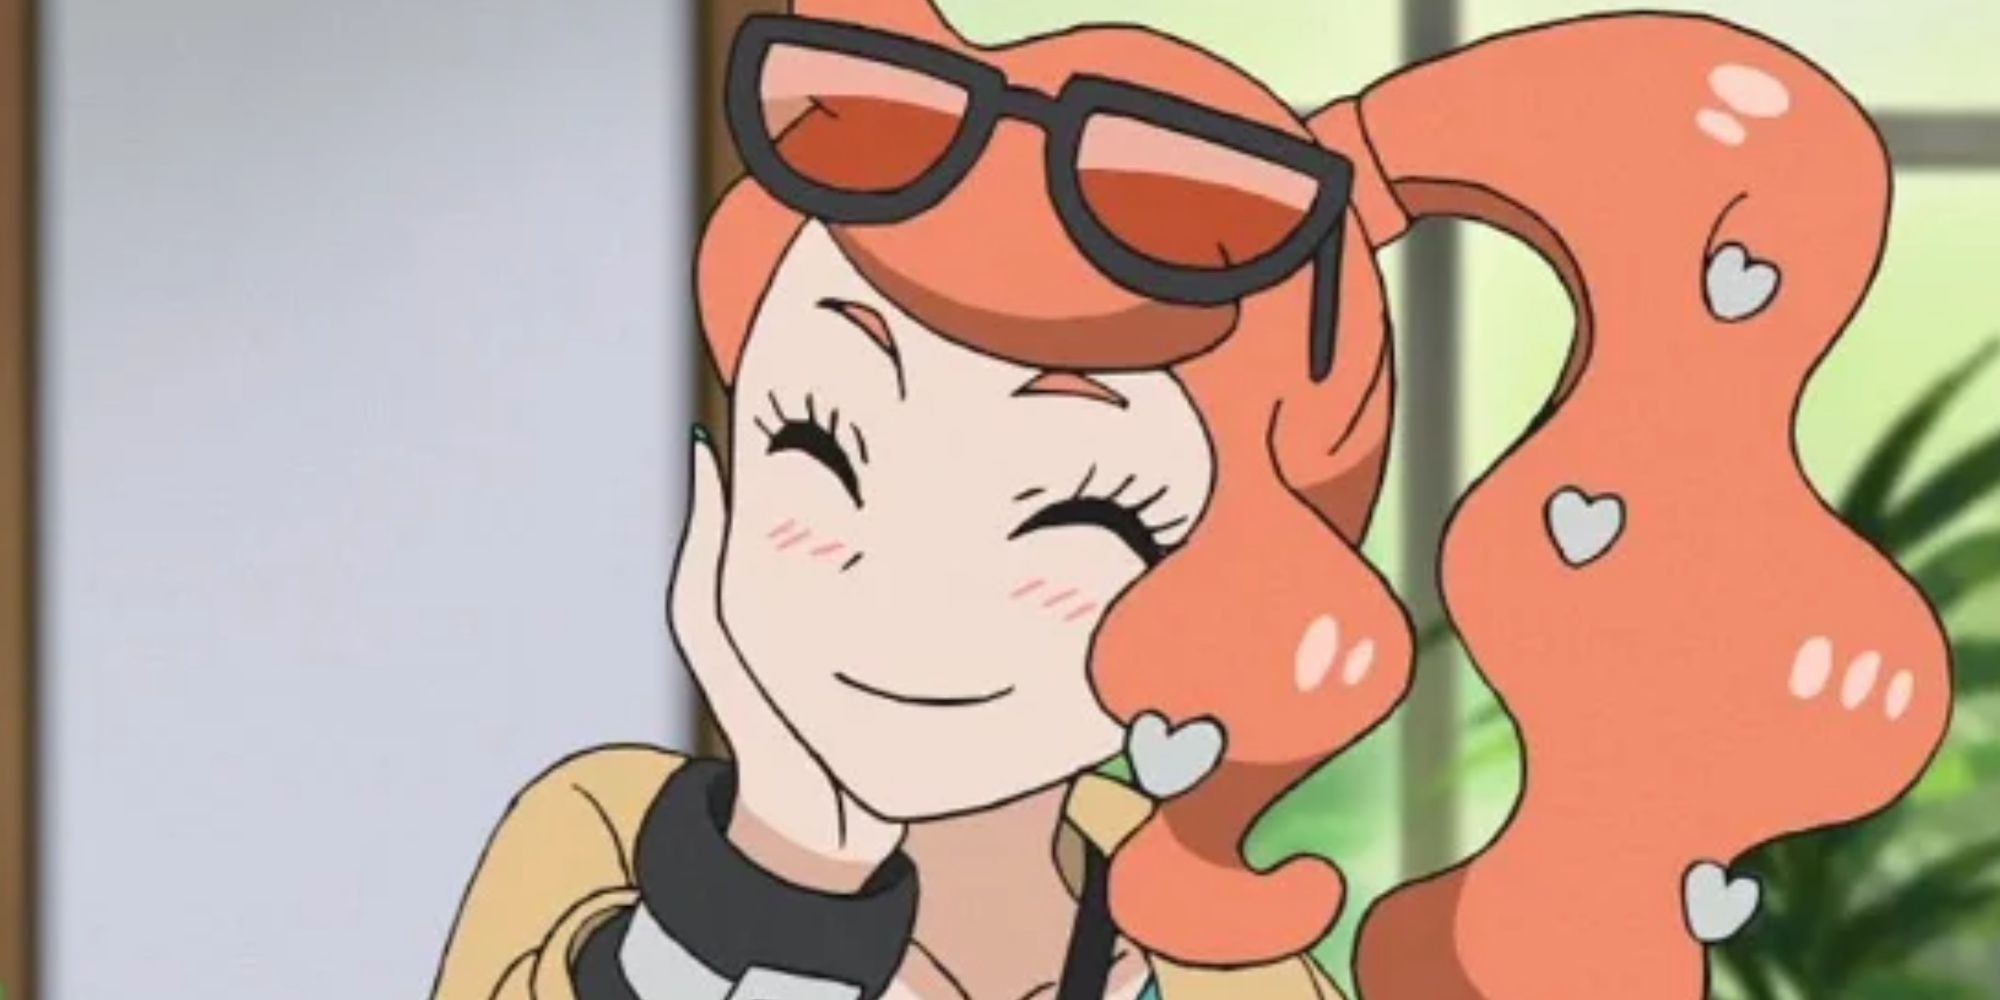 Sonia from the Pokemon anime. A young woman with red hair adorned with silver hearts, tied back into a ponytail. Sunglasses sit on top of her head. She's smiling, eyes closed, while she holds one hand against the side of her face.